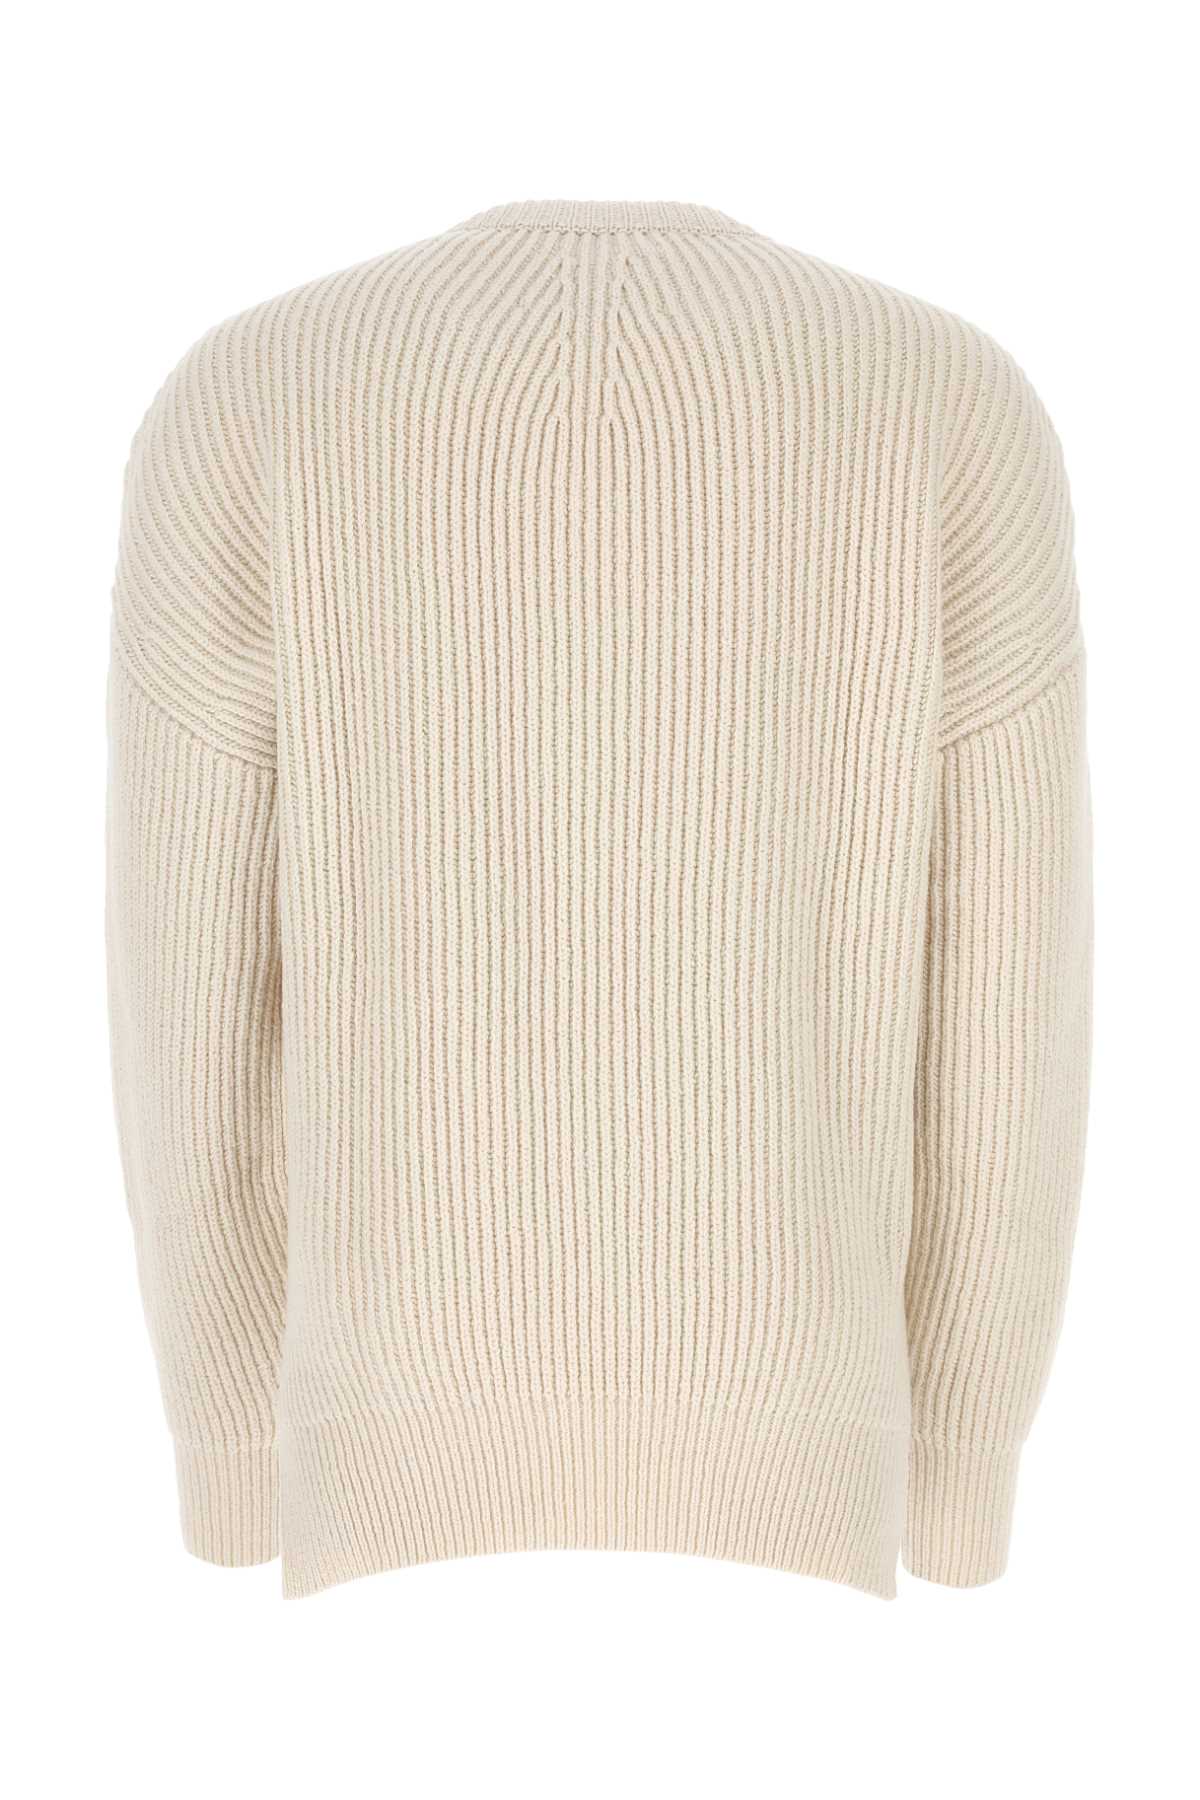 Jil Sander Ivory Cotton And Wool Sweater In 109